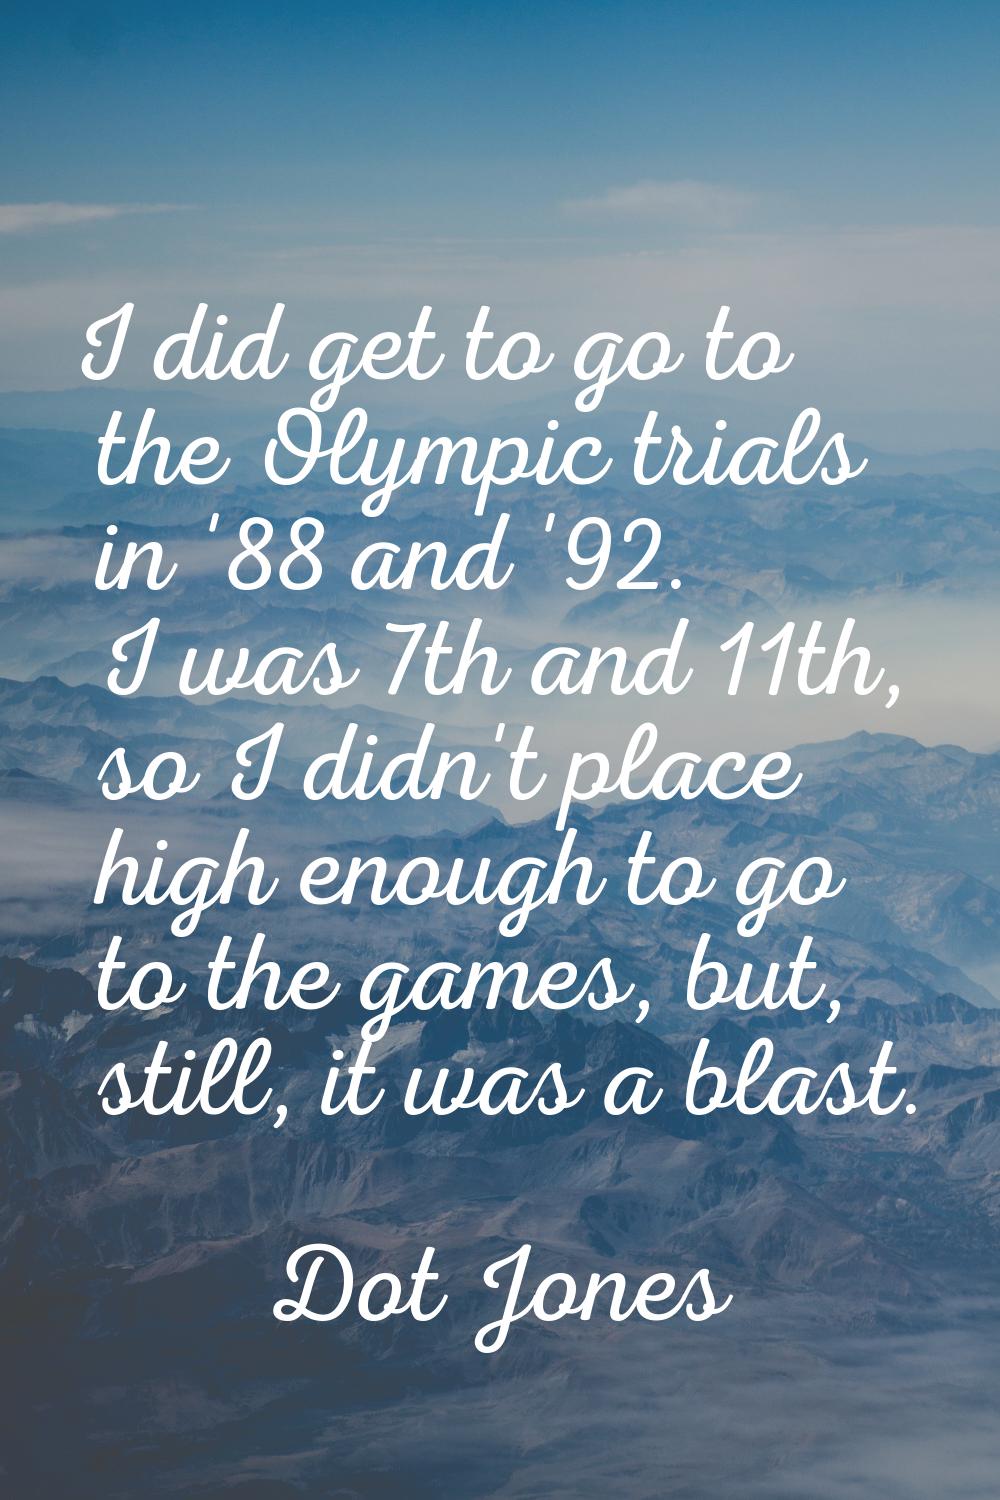 I did get to go to the Olympic trials in '88 and '92. I was 7th and 11th, so I didn't place high en